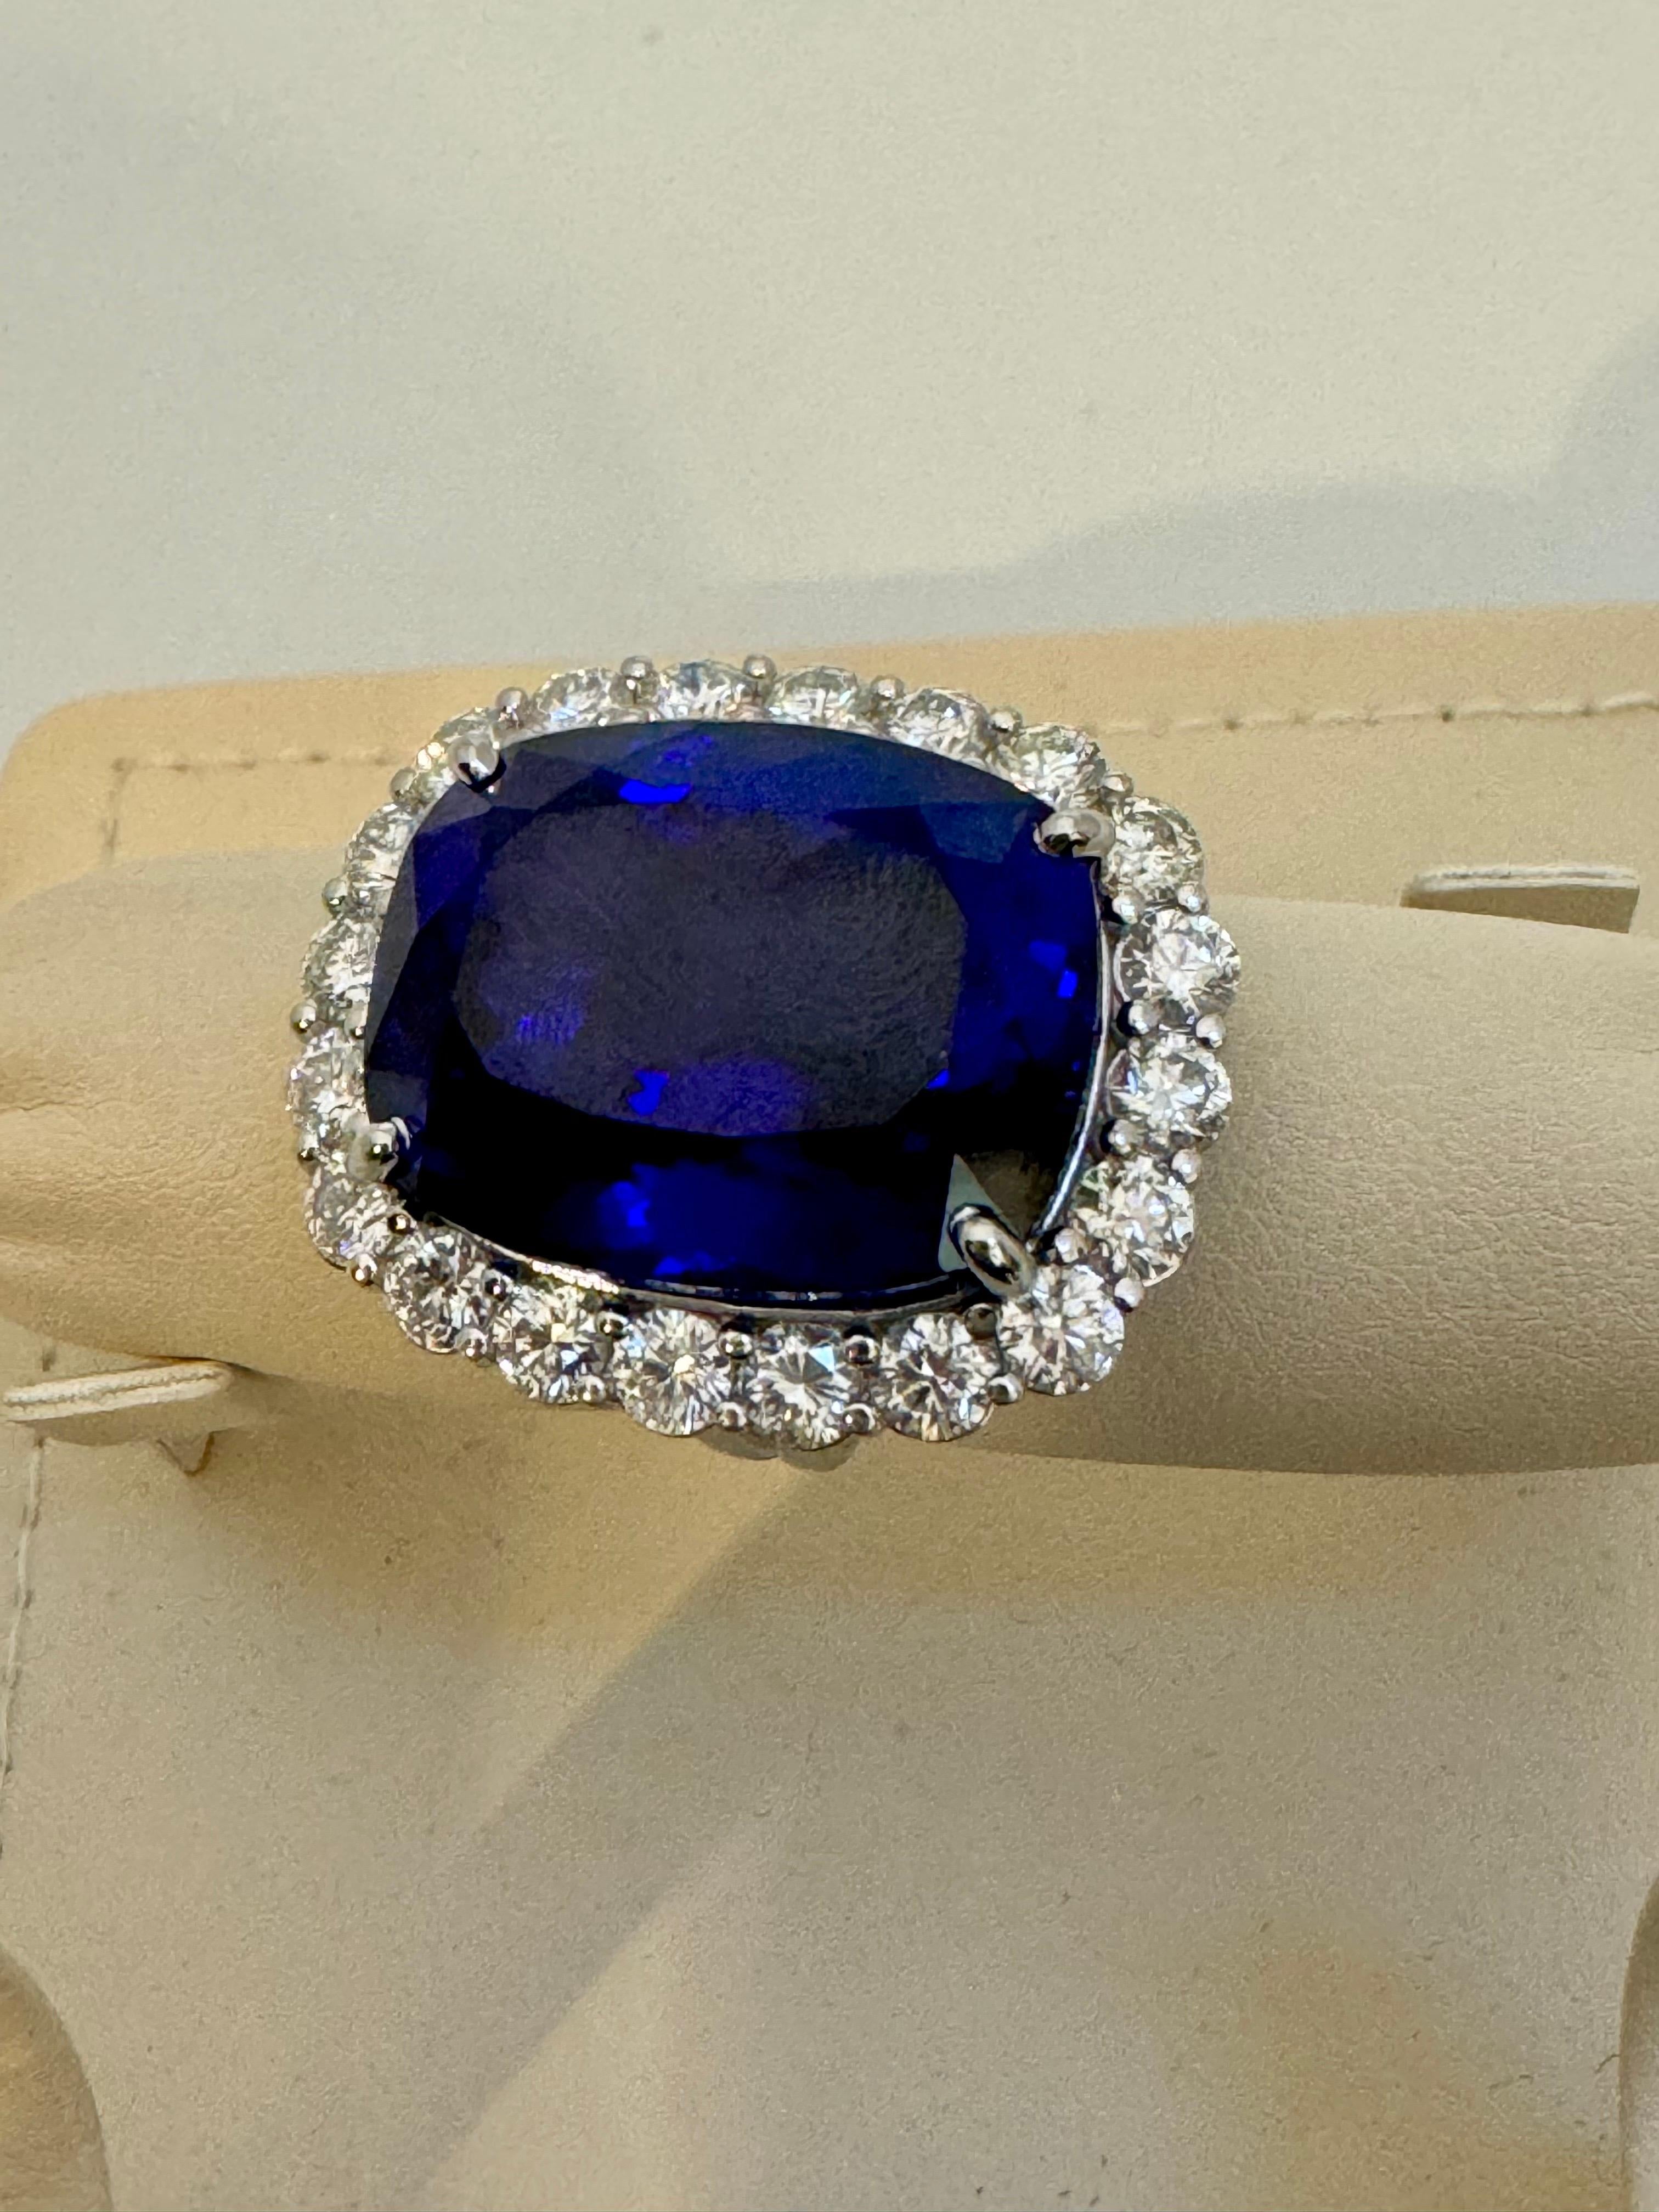 43.74 Ct Cushion-Cut Tanzanite & 4 Ct  Diamond Ring in 14K White Gold Size 6.5 For Sale 2